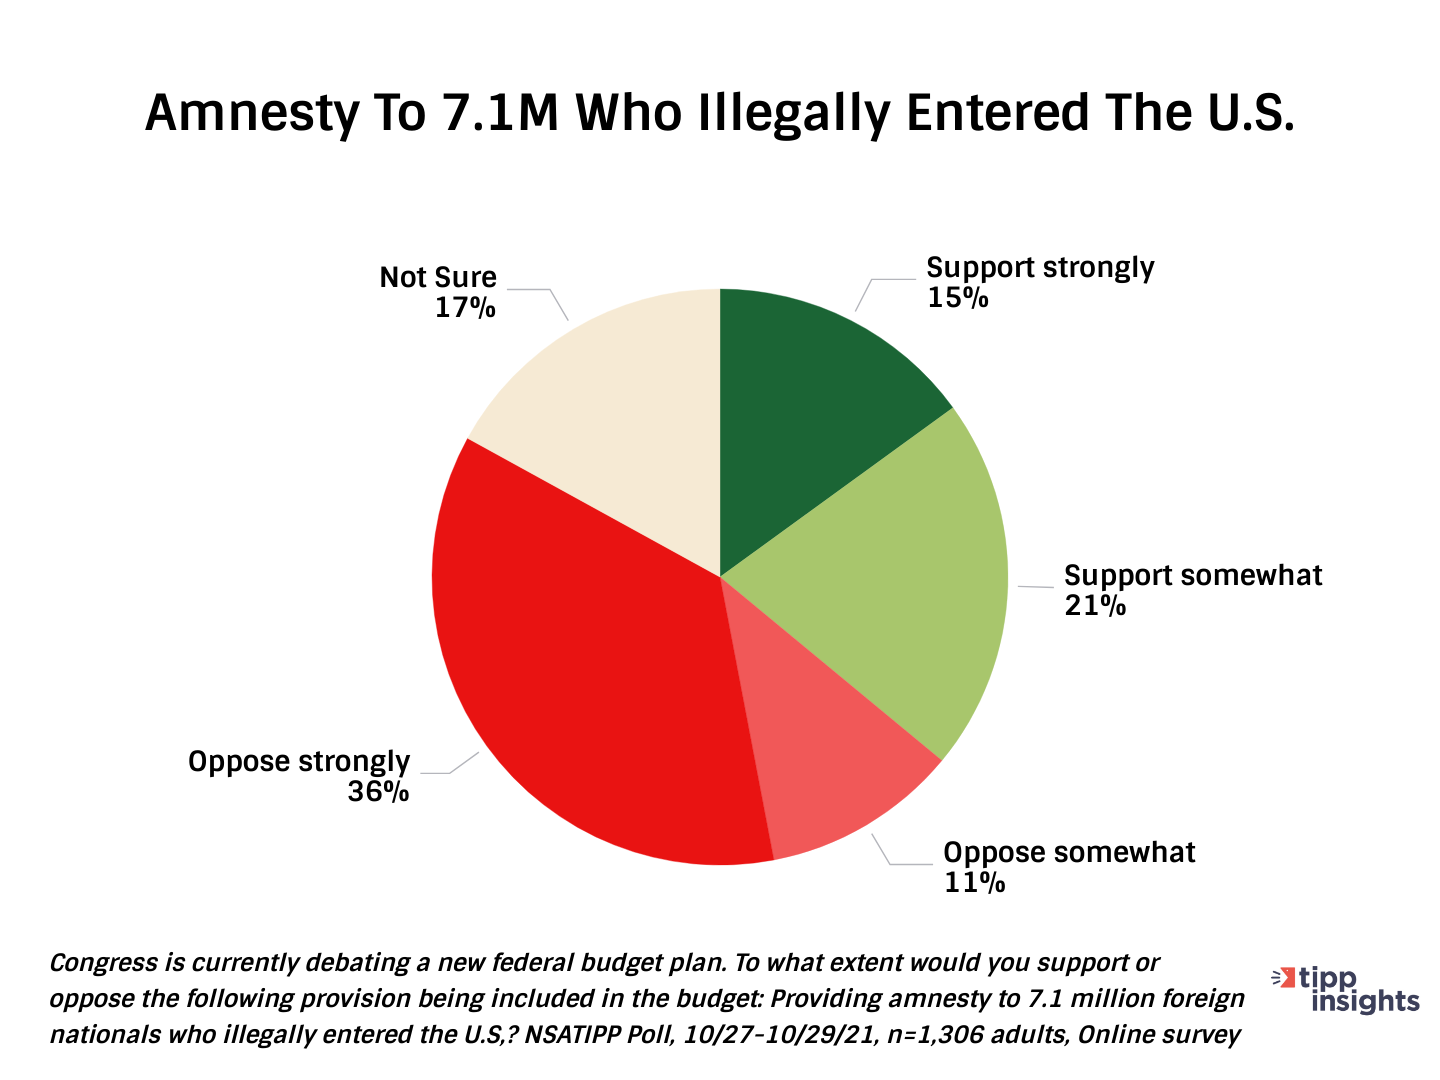 NSA/TIPP Poll: Should amnesty be given to 7.1 million who illegally entered the united states?